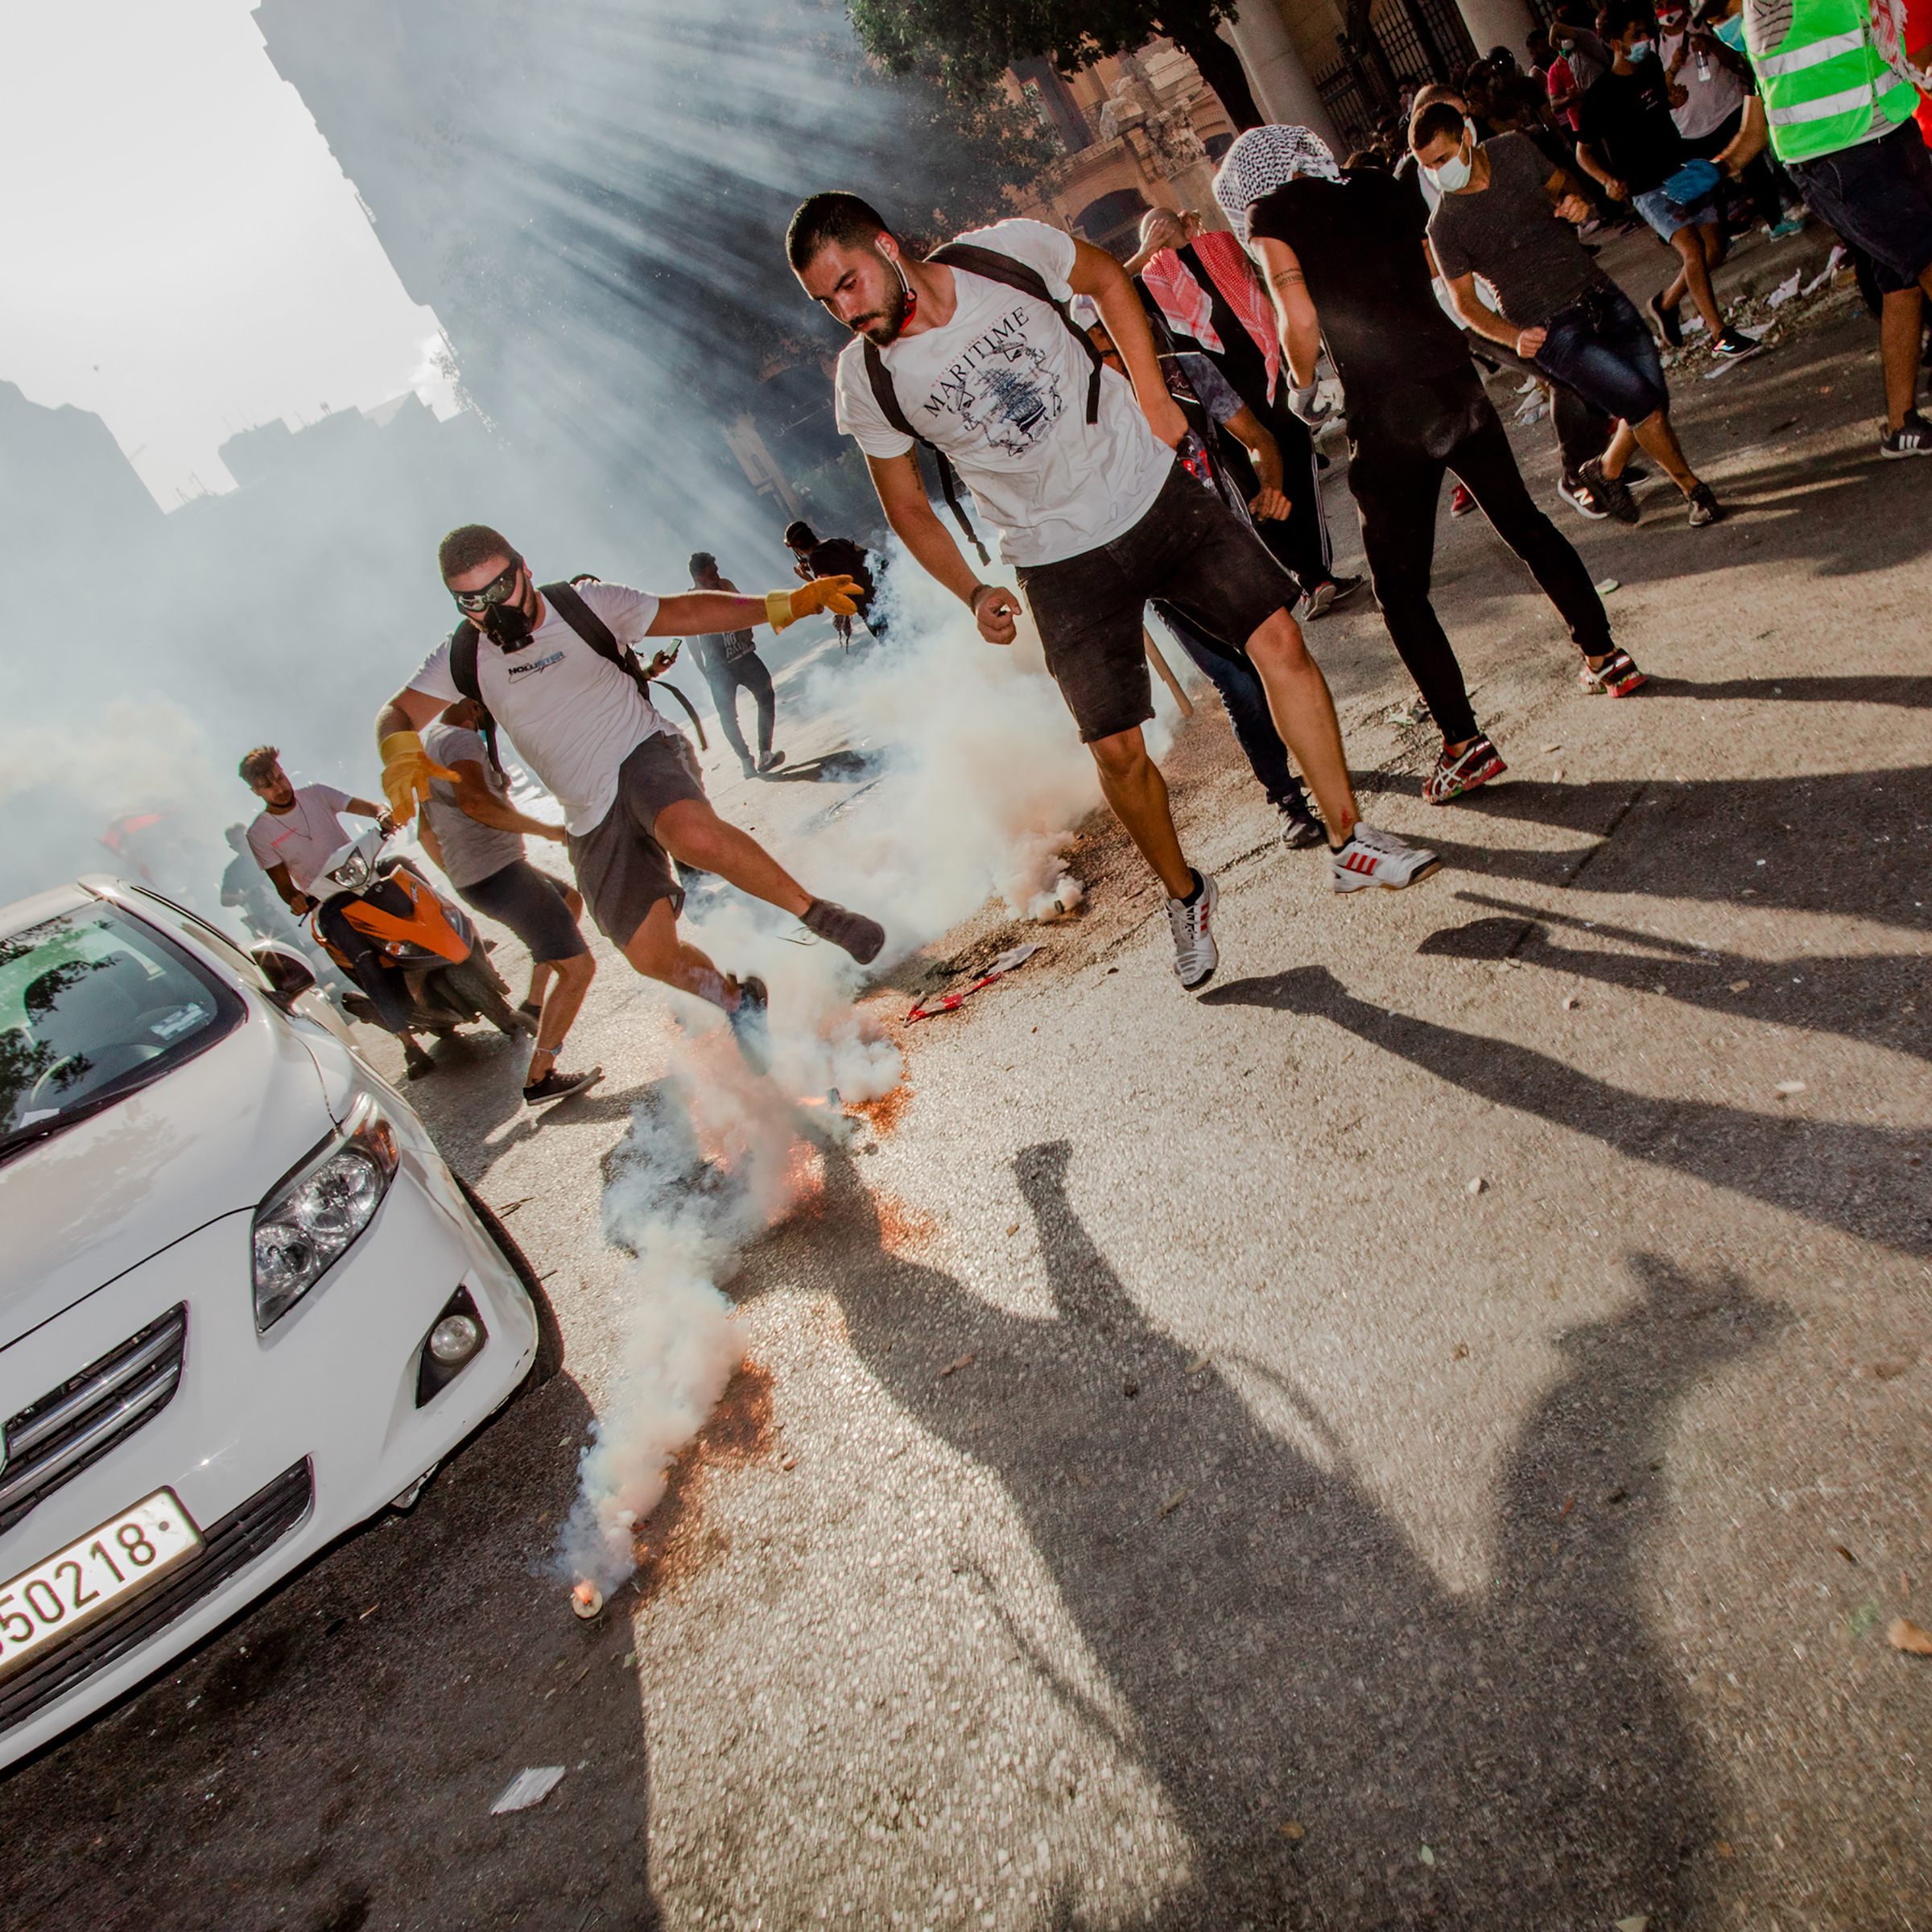 Smoke billows from a tear gas canister during a mass demonstration in Beirut on Aug. 8, four days after the blast.